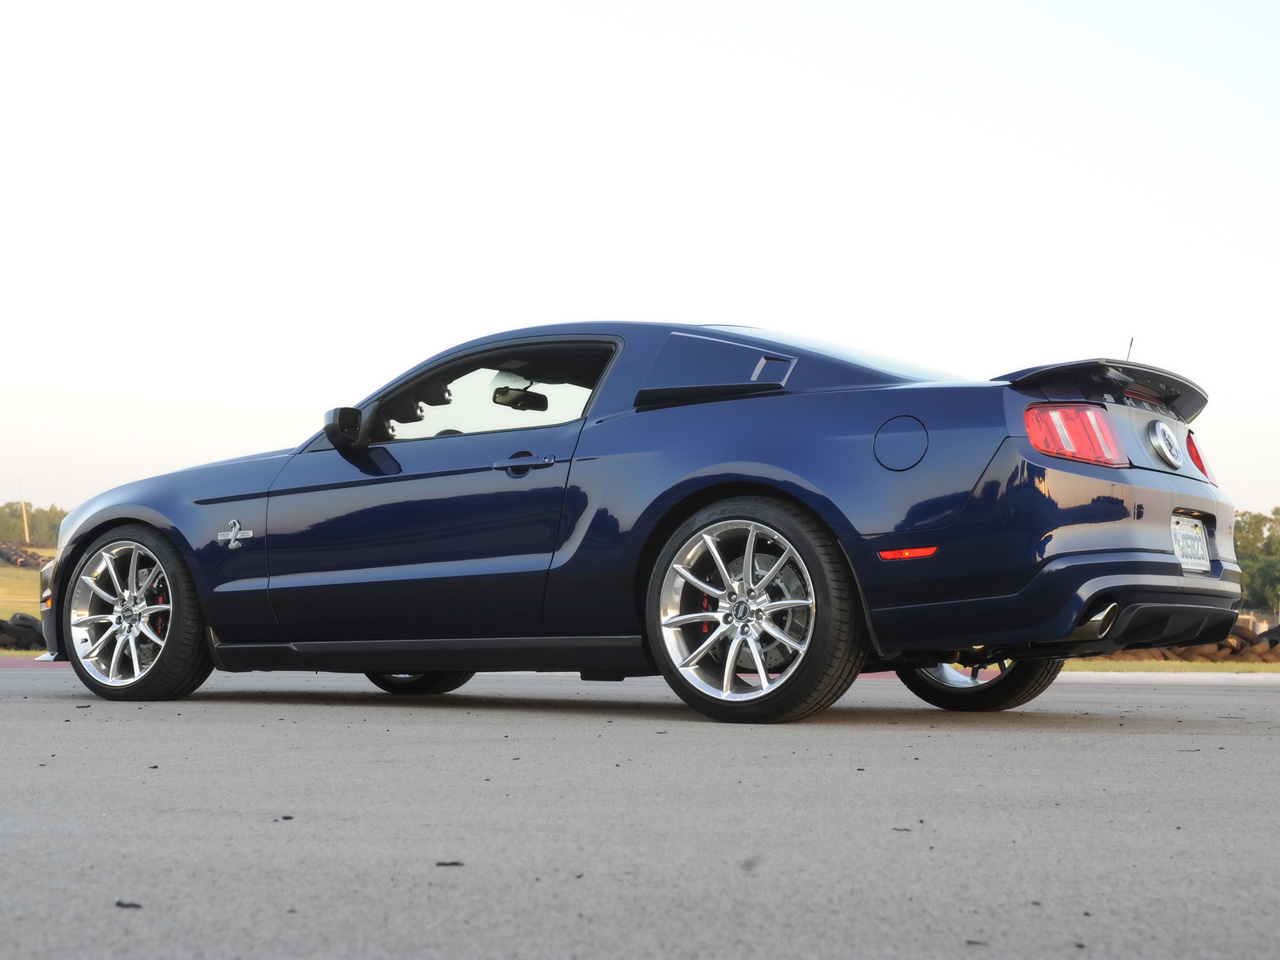 2010 Ford shelby gt500 super snake specs #2